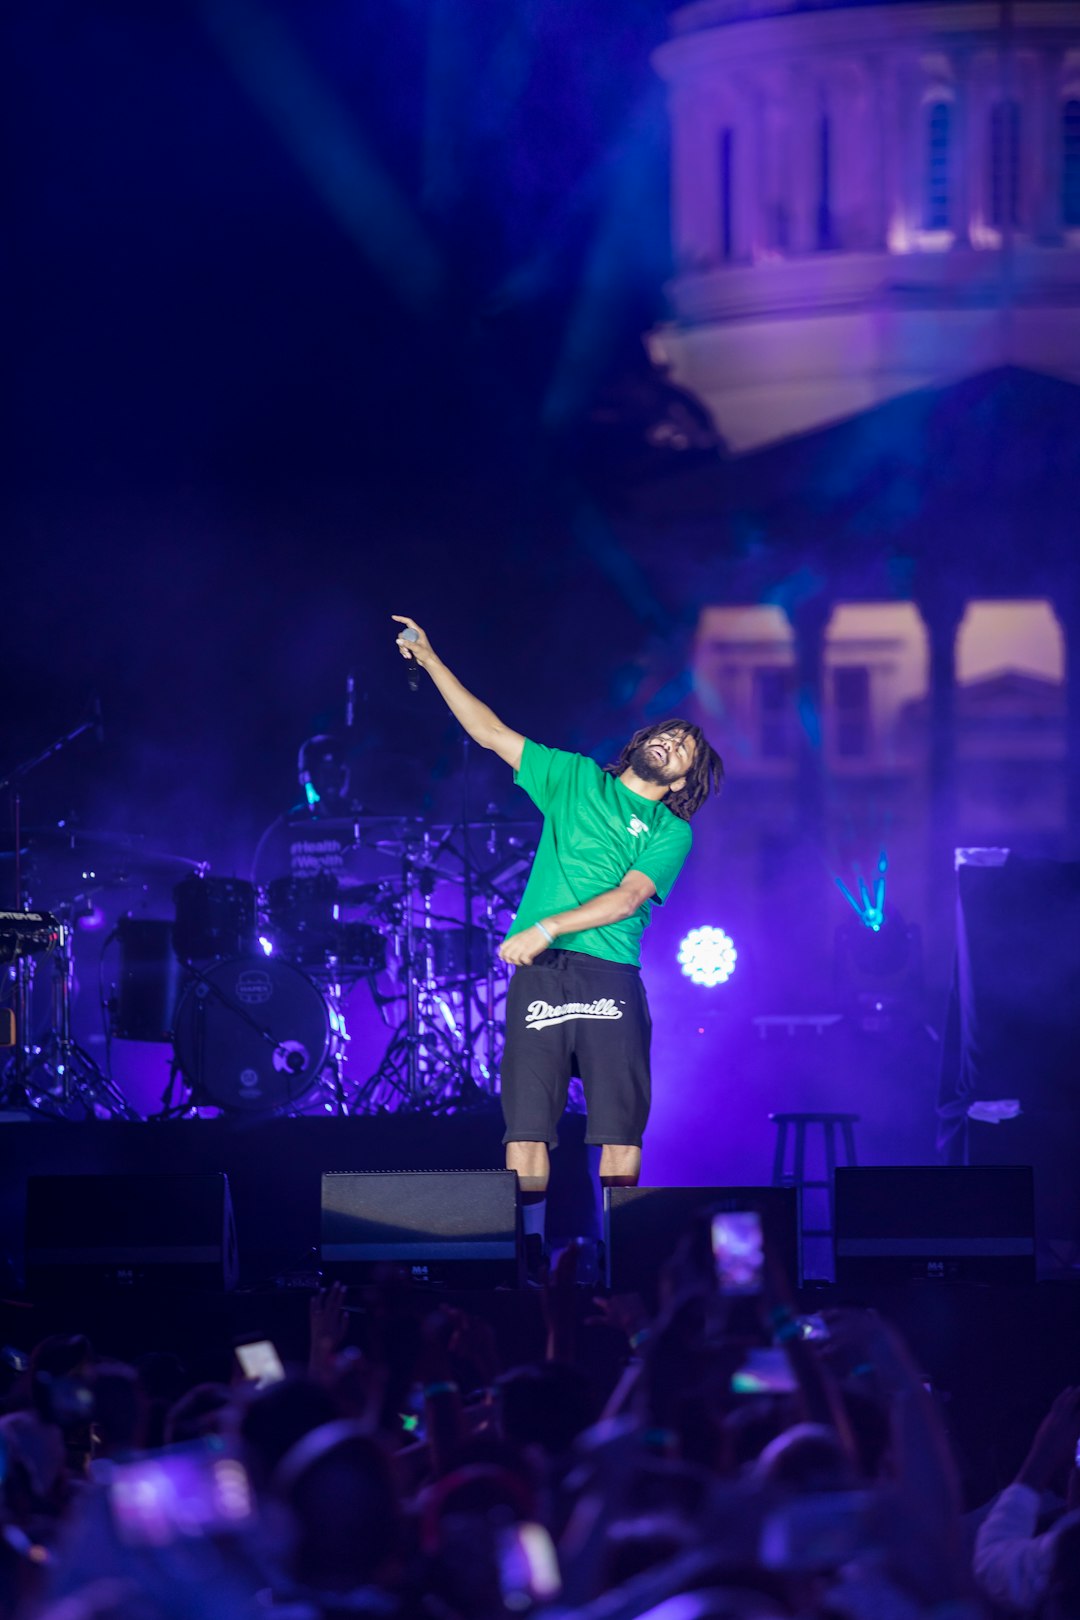 man in green shirt and black pants singing on stage